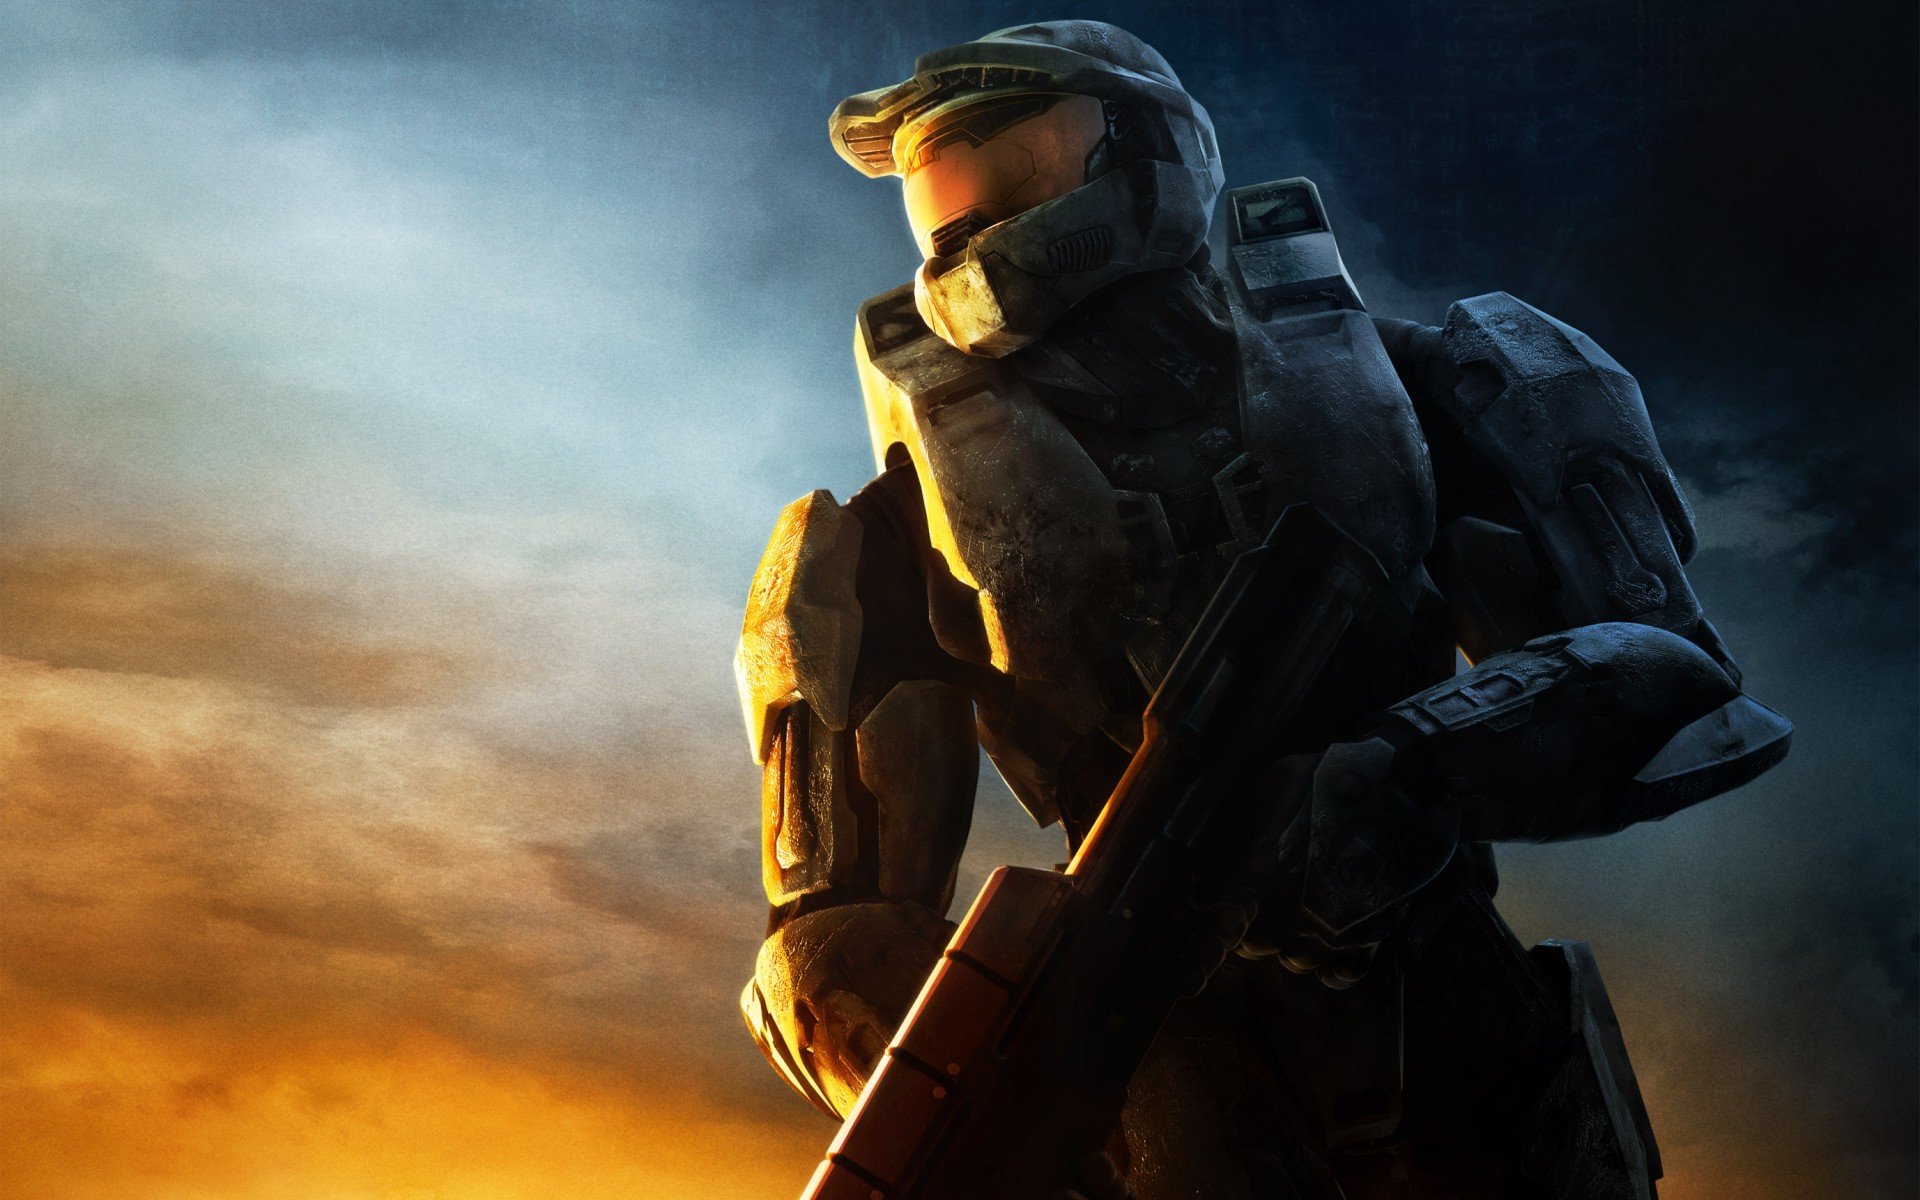 Halo TV series might begin filming this fall